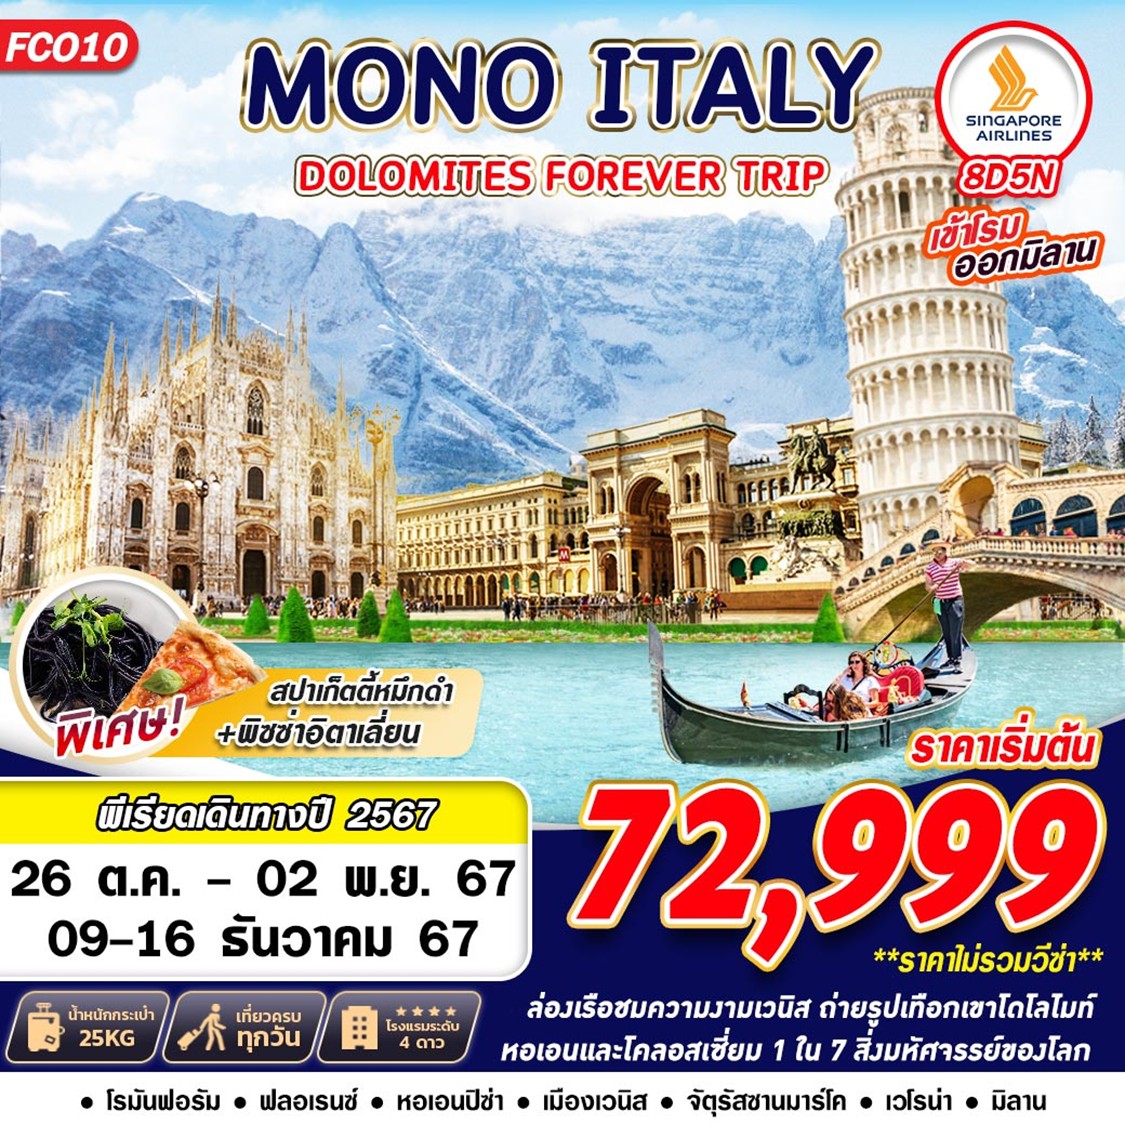 MONO ITALY DOLOMITES FOREVER 8วัน 5คืน by SINGAPORE AIRLINES